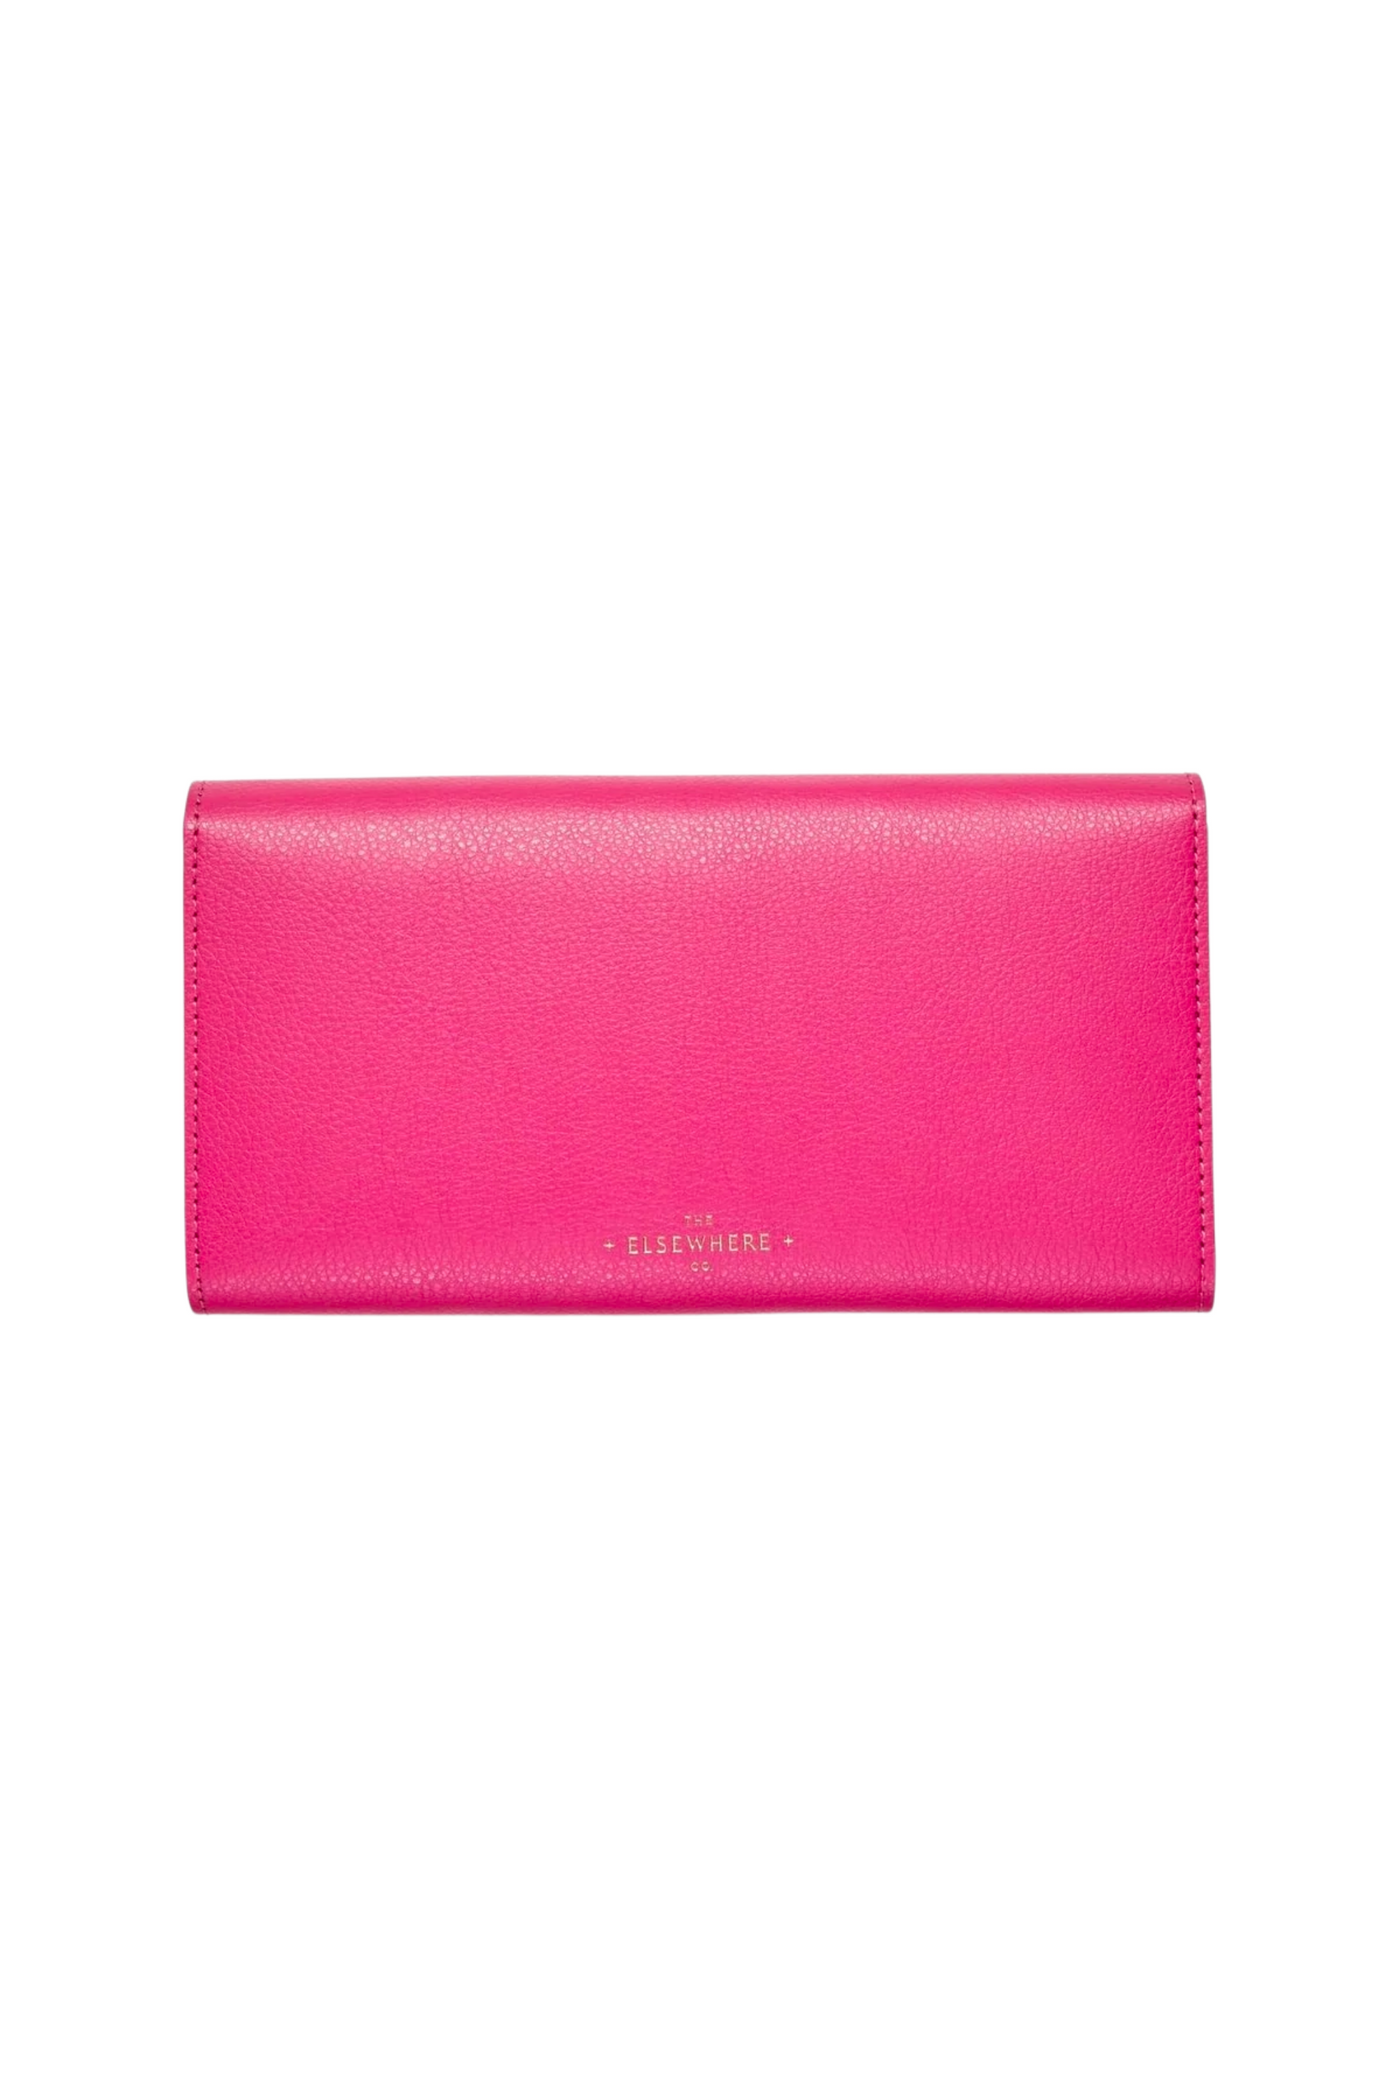 The Elsewhere Co. Sustainable Leather Wallet in Paradise Pink, available on ZERRIN with free Singapore shipping